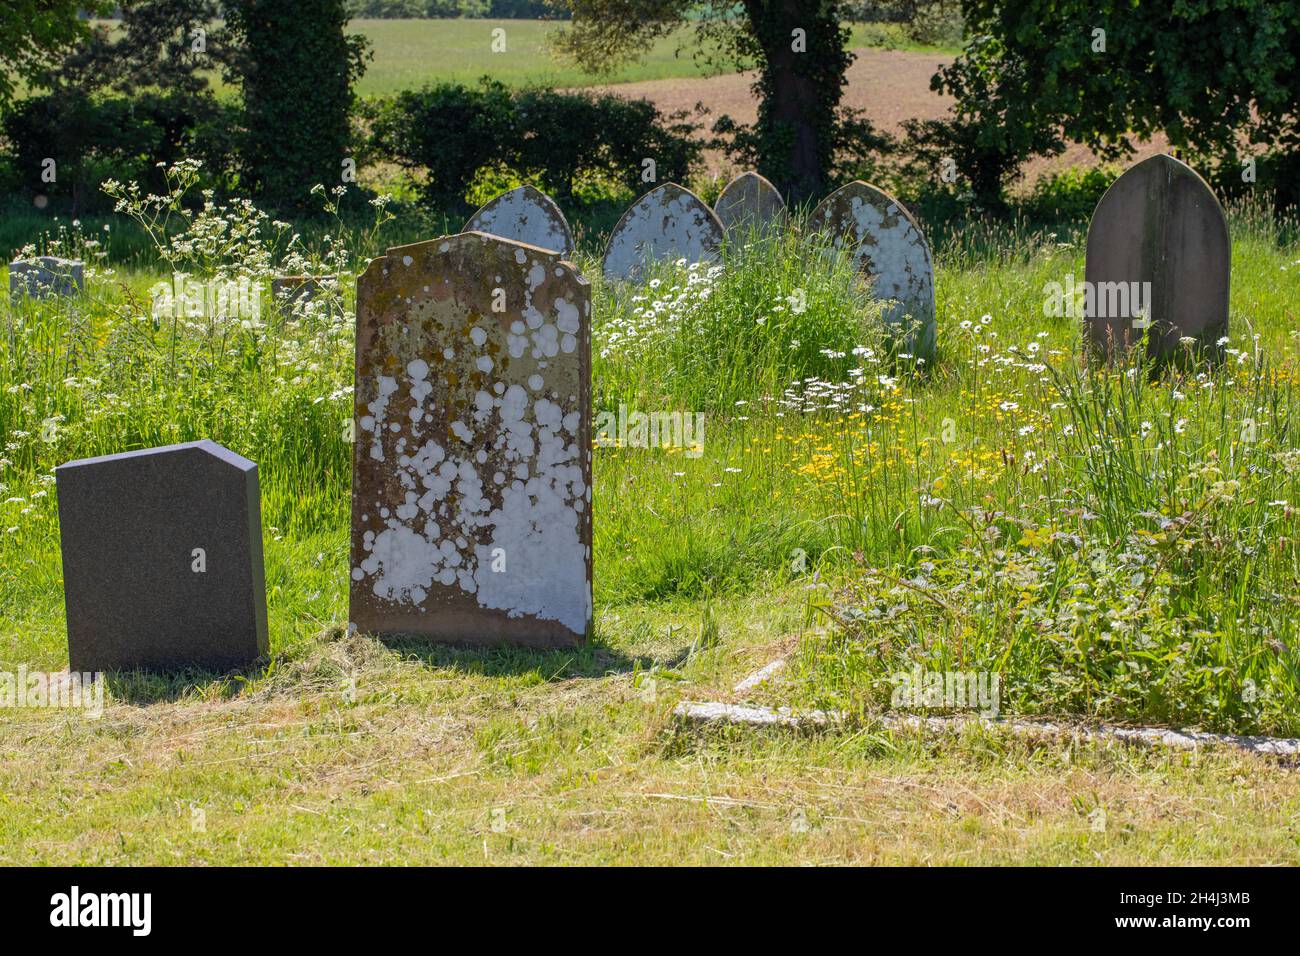 Back to nature, a managed churchyard, grave yard, with areas left  seasonally mown. NB different stone surfaces attractiveness to lichens, front left. Stock Photo